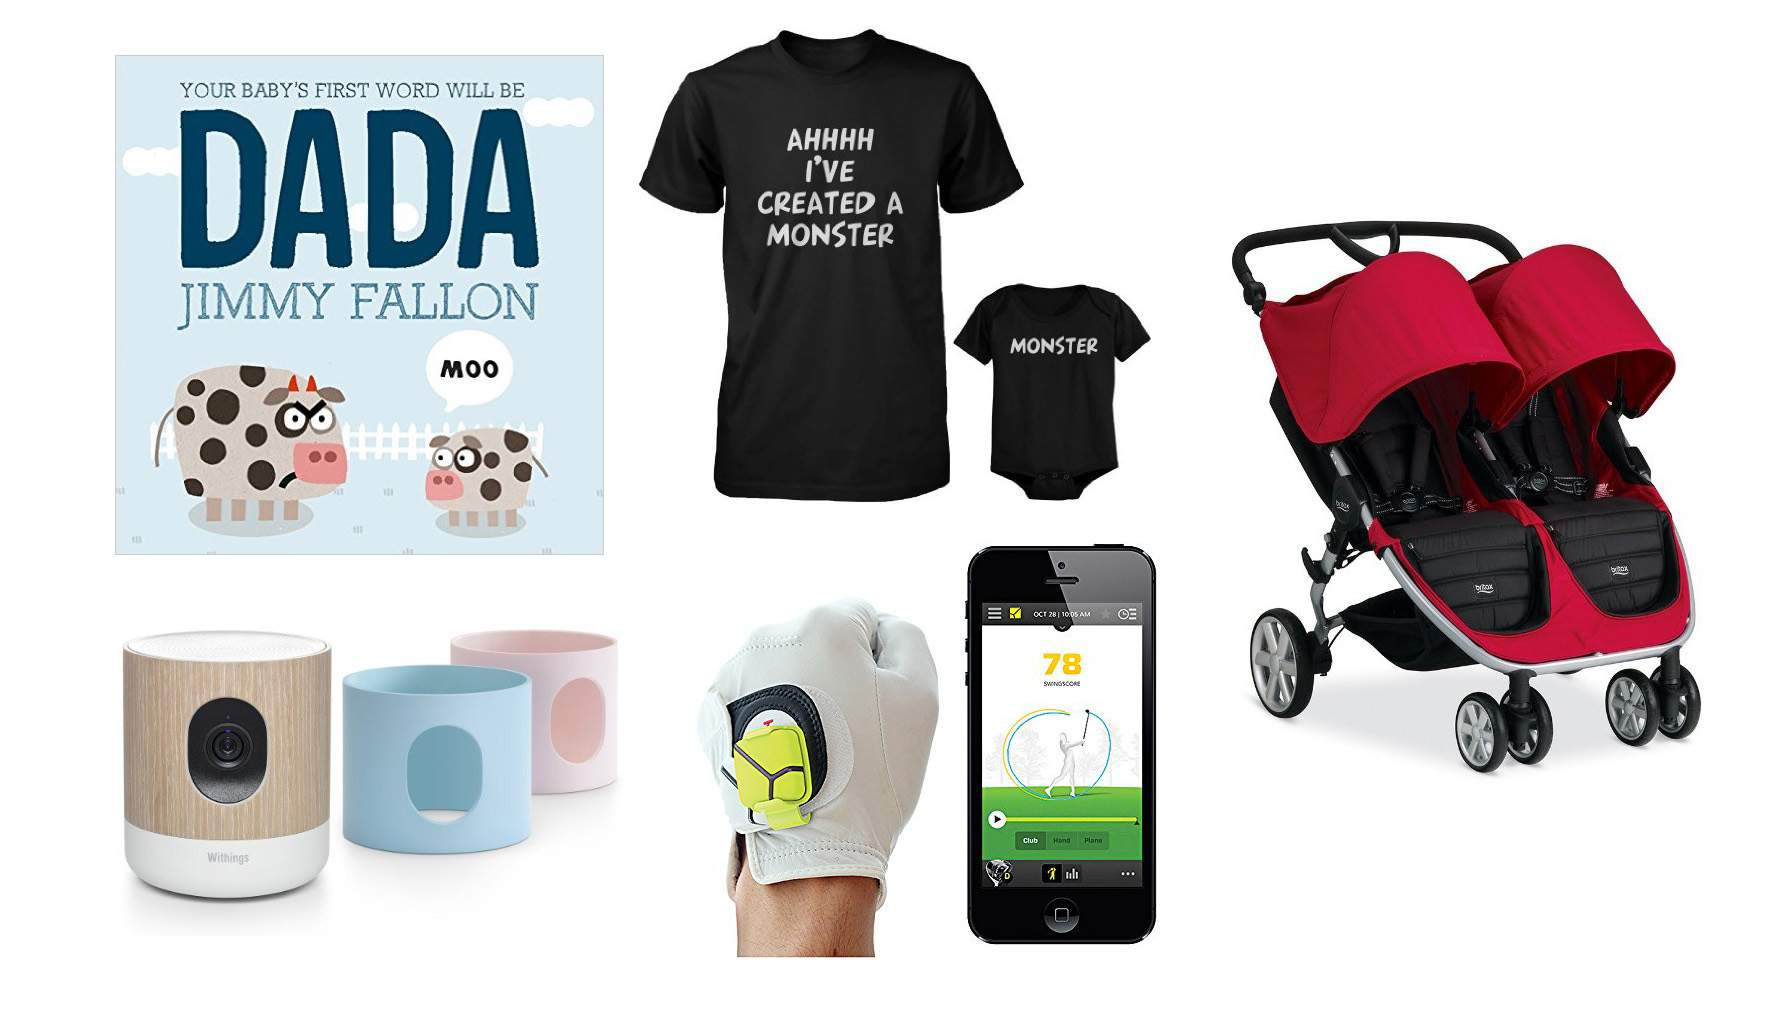 Gift Ideas For New Fathers
 Top 10 Best Father’s Day Gifts for New Dads